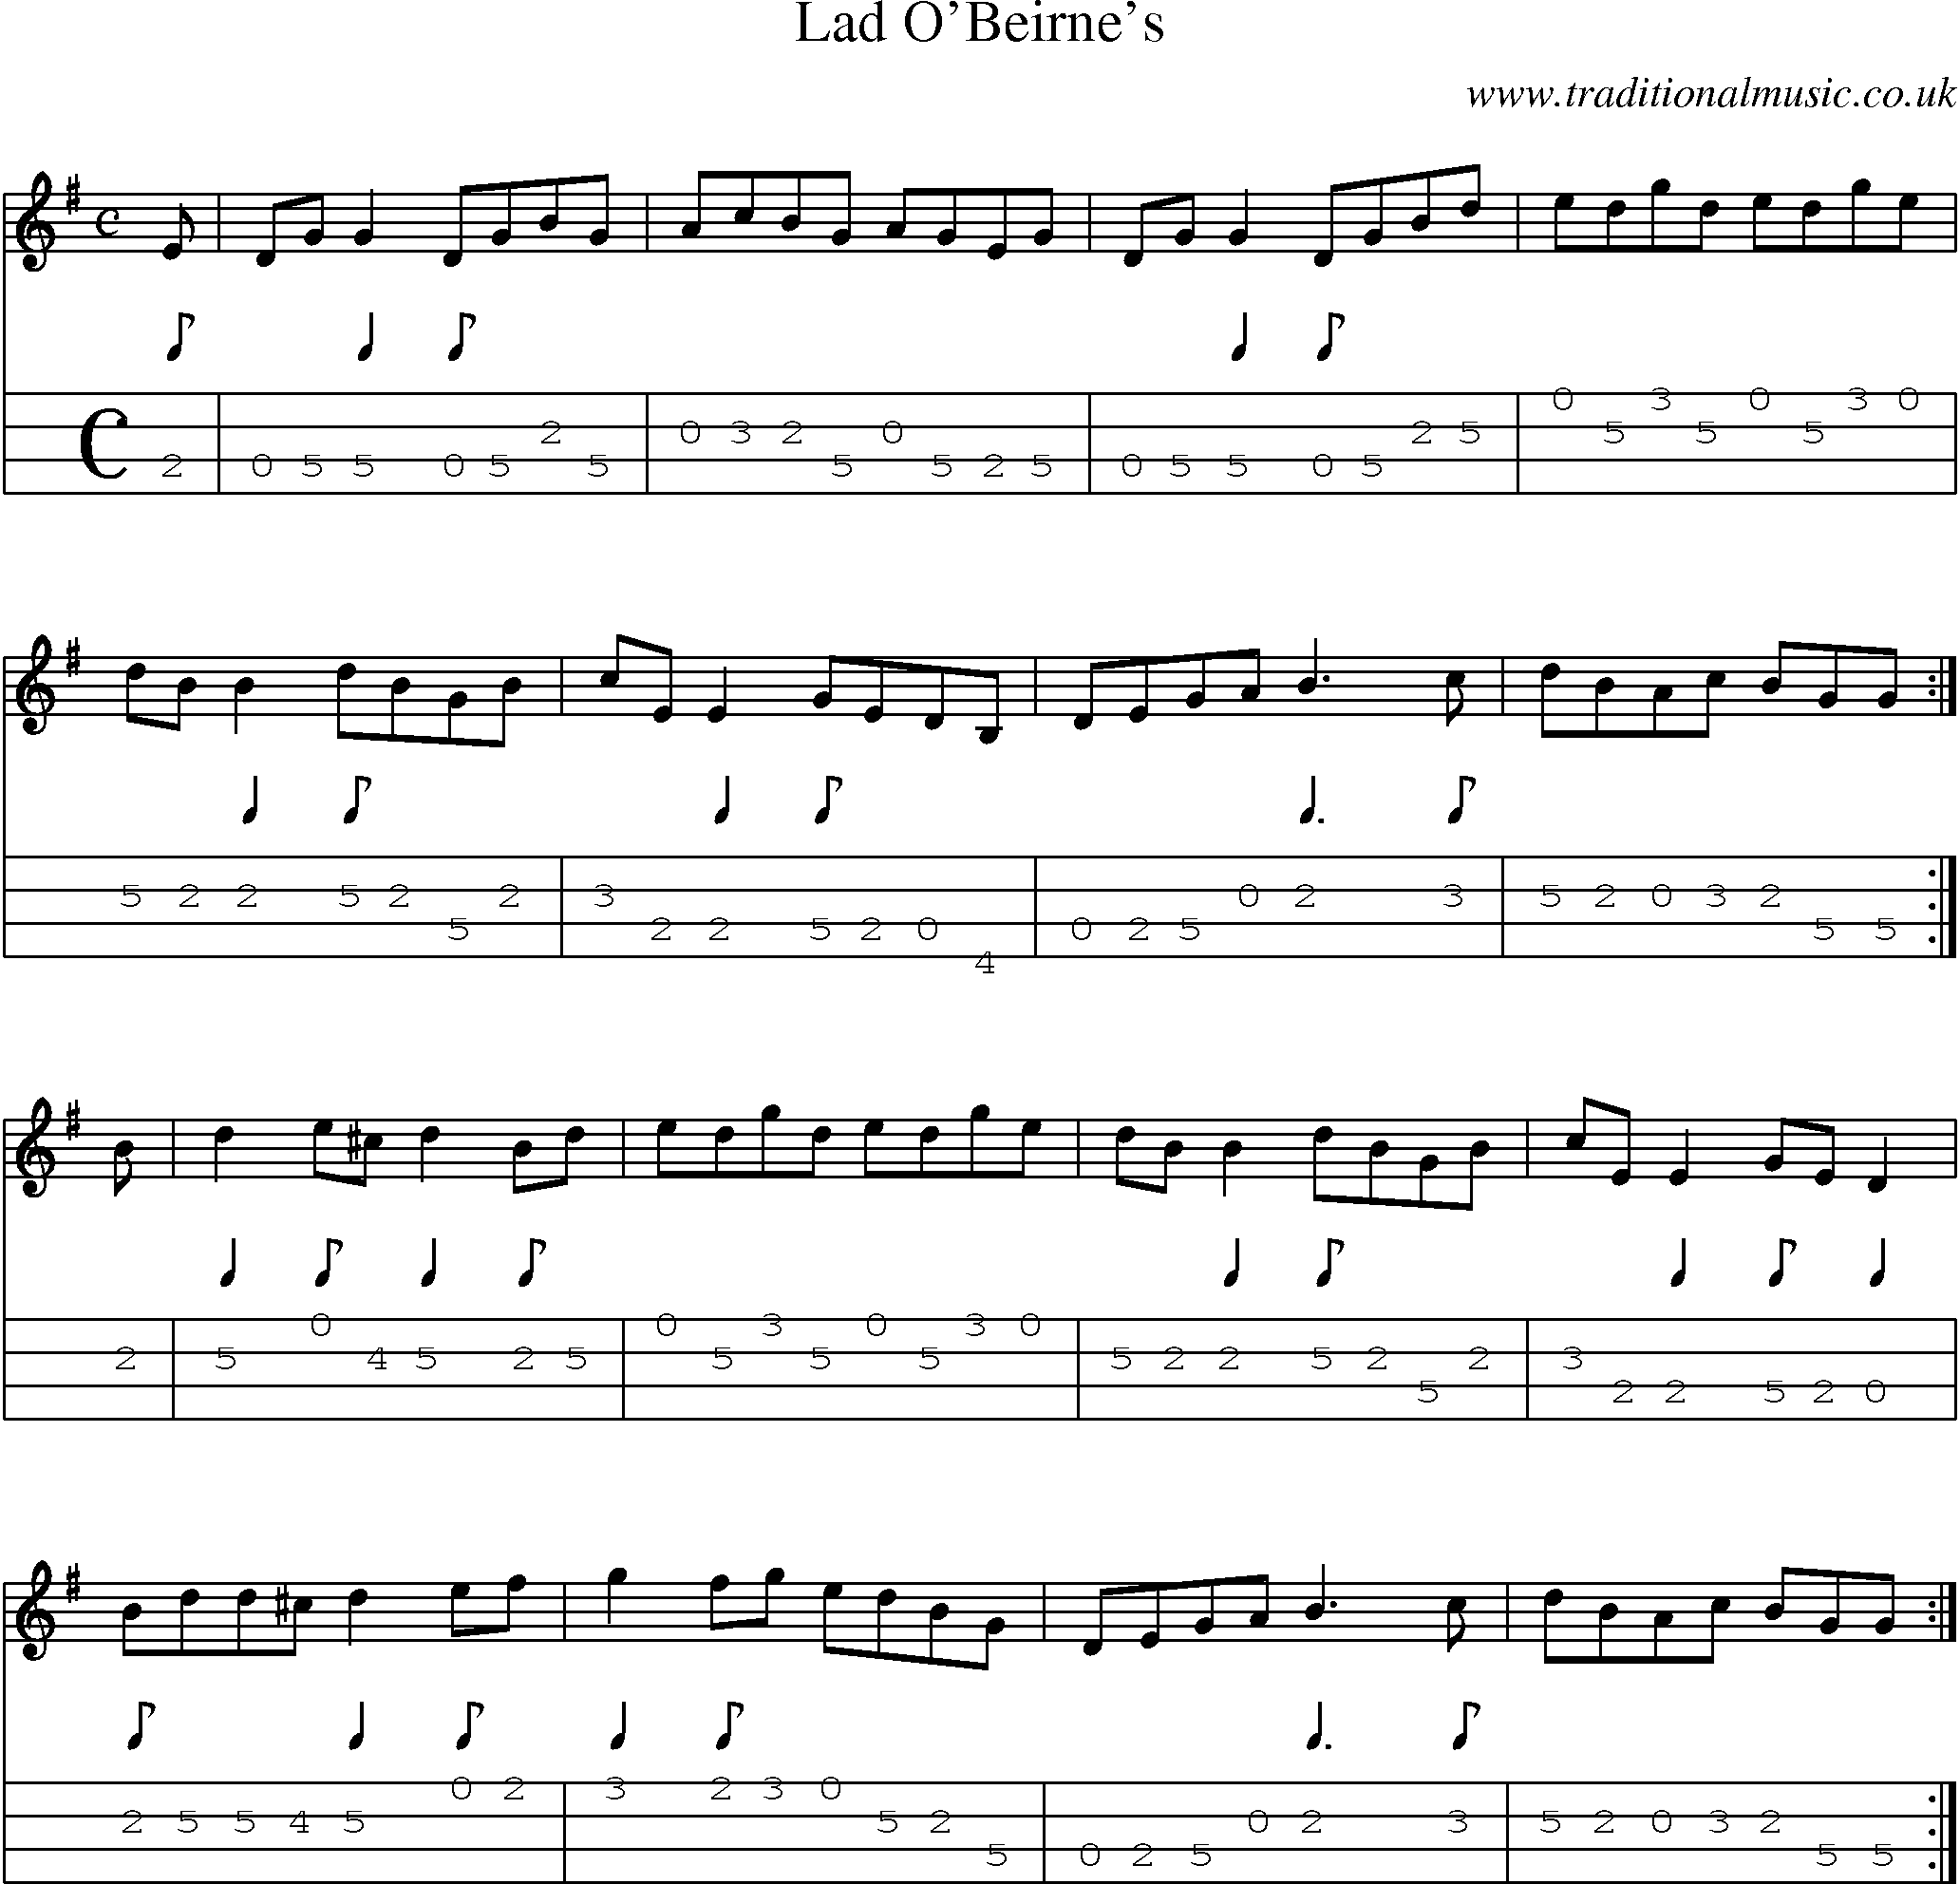 Music Score and Mandolin Tabs for Lad Obeirnes